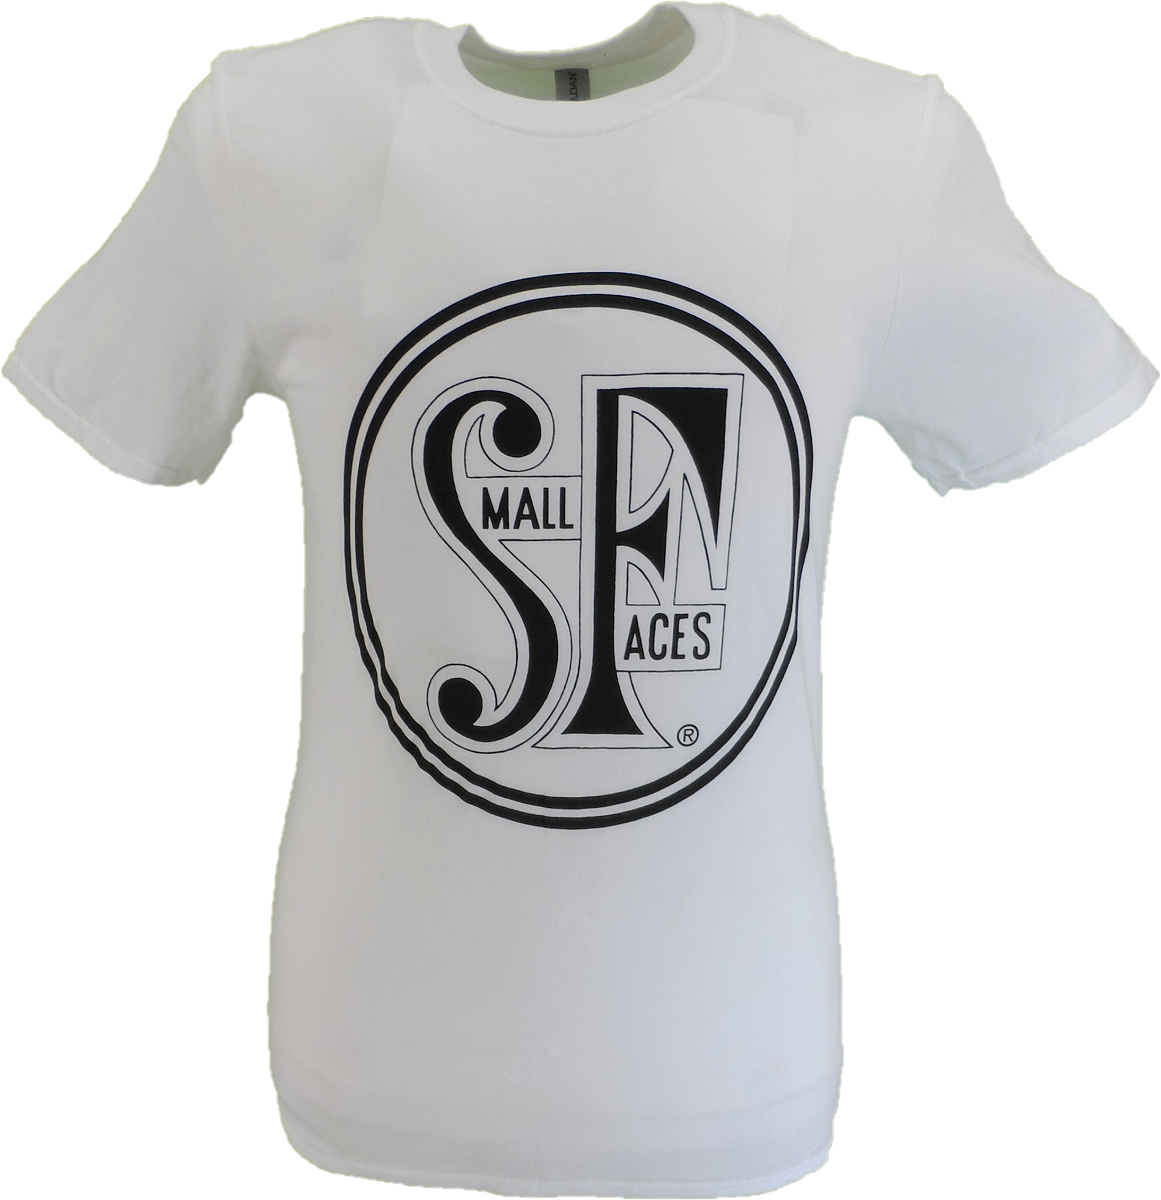 Mens White Official Small Faces Logo T Shirt